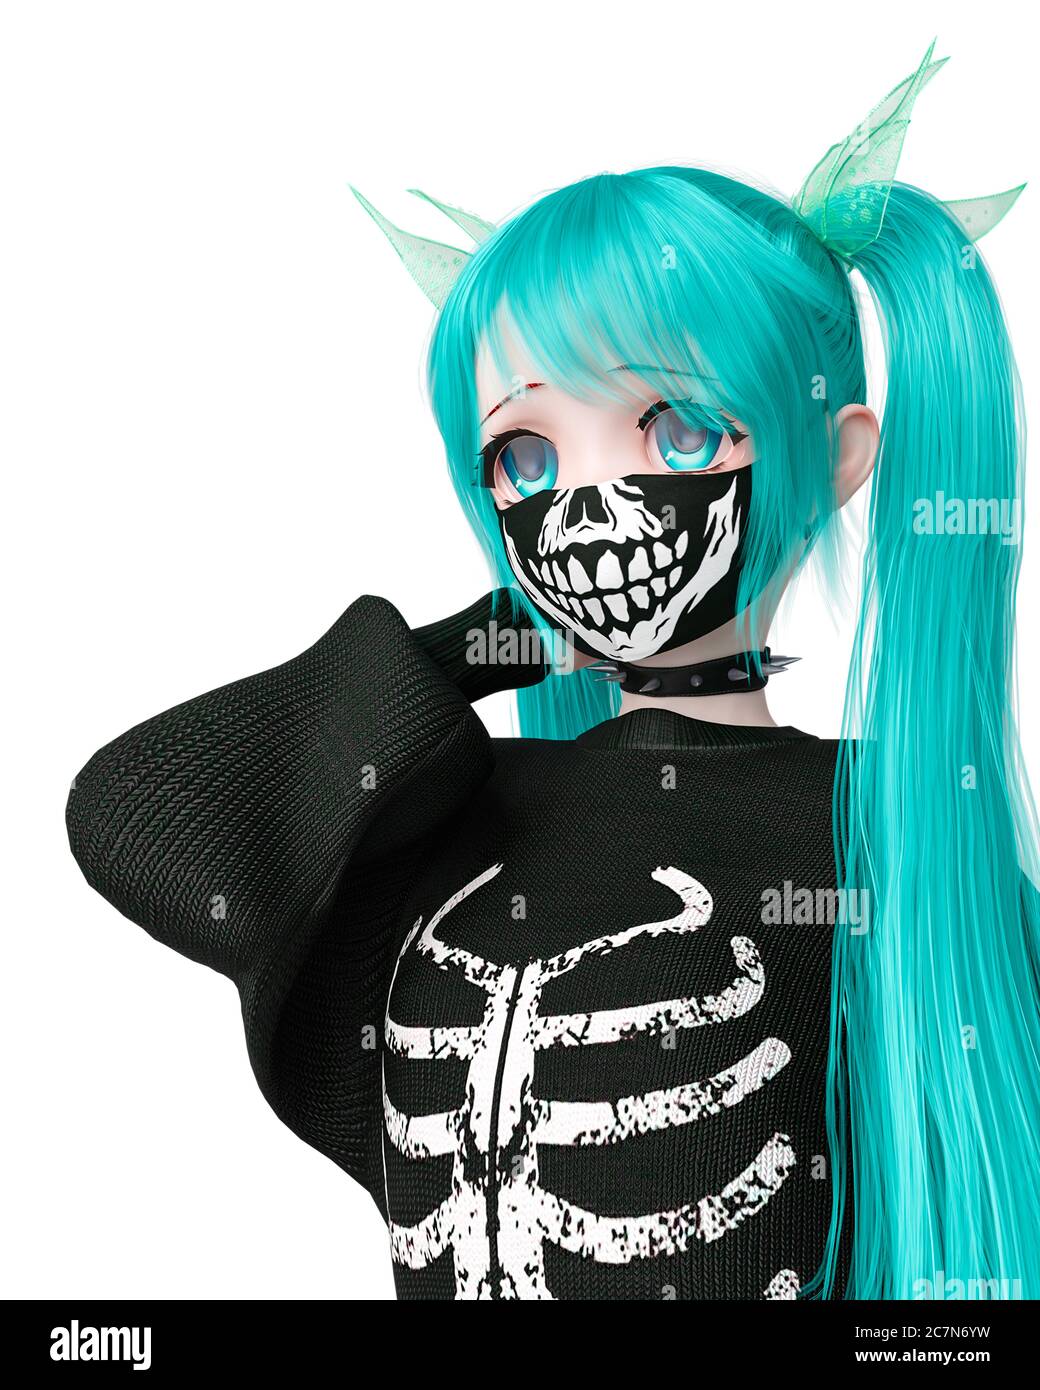 street girl is thinking about wearing a skeleton outfit on kwaii anime style on white background, 3d illustration Stock Photo